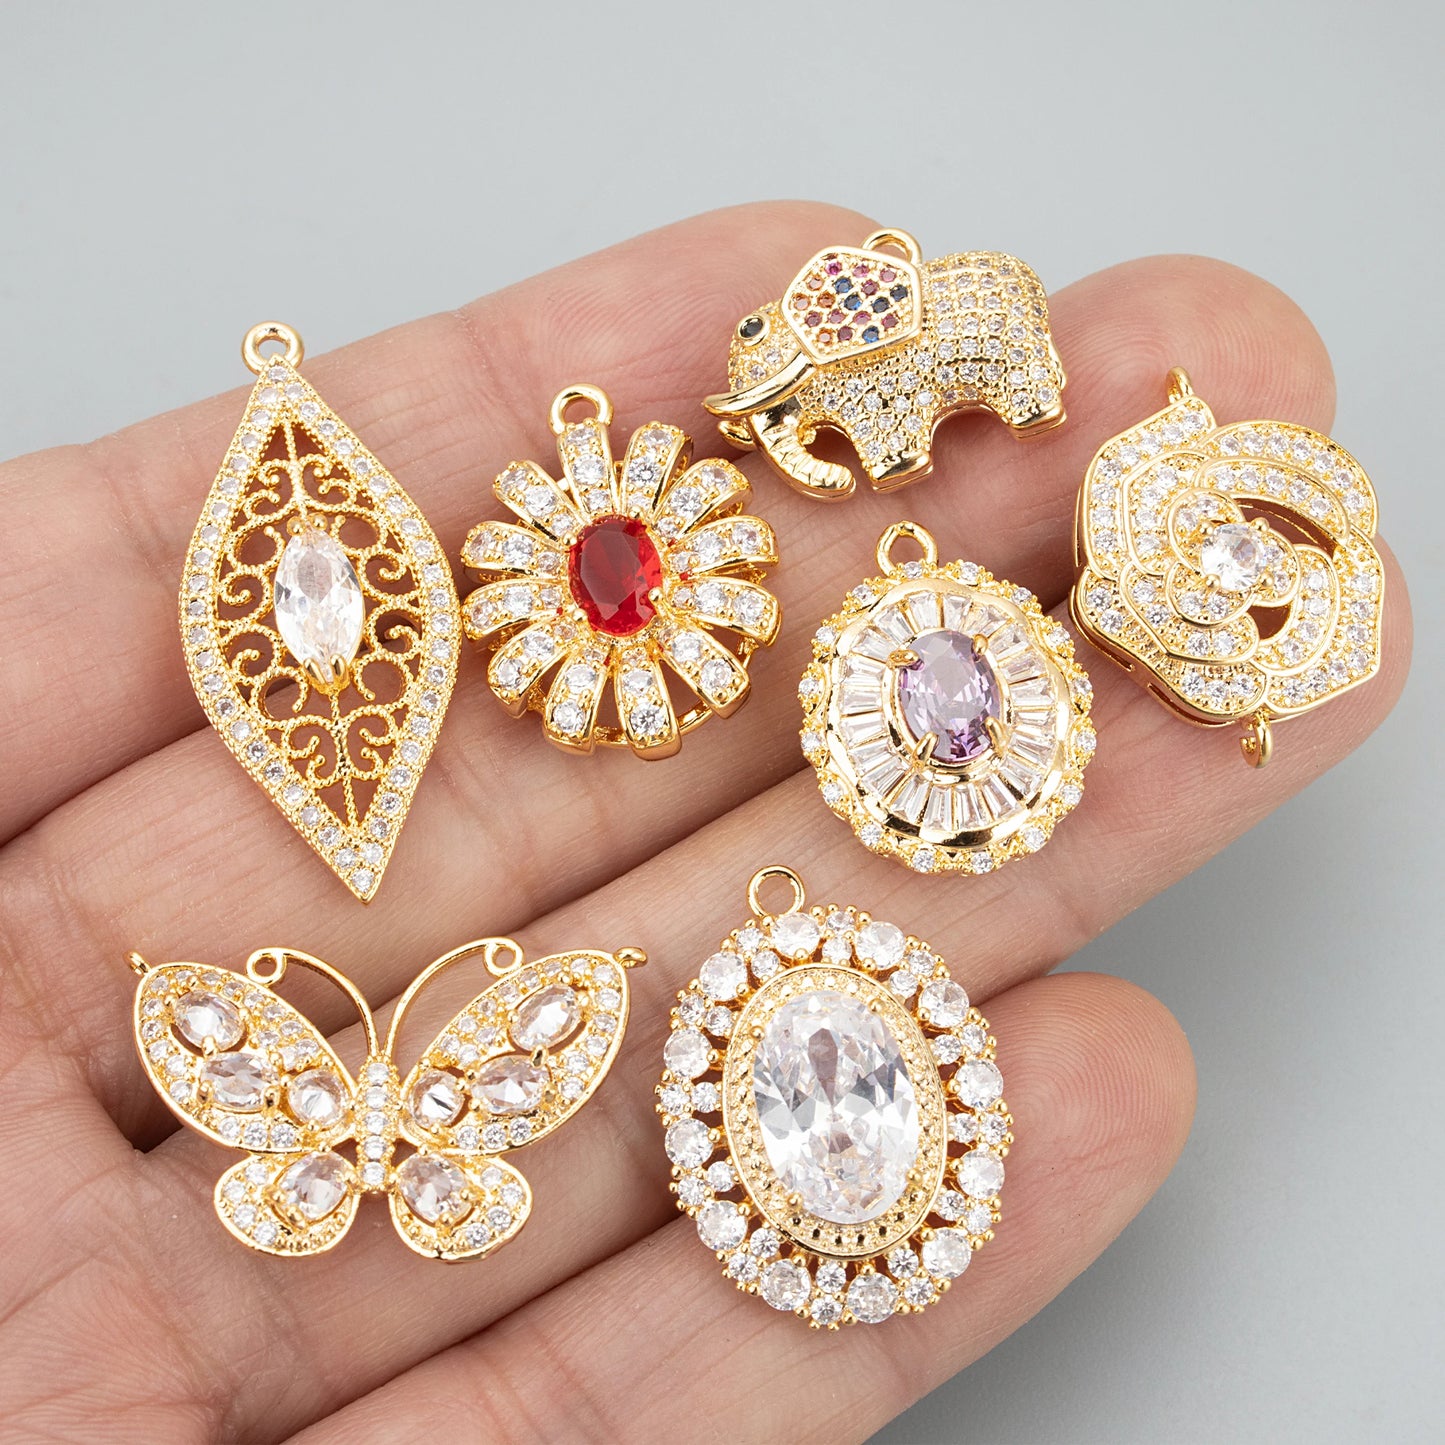 GUFEATHER ME49,jewelry accessories,18k gold plated,copper,zircons,hand made charms,jewelry making,diy pendants,6pcs/lot